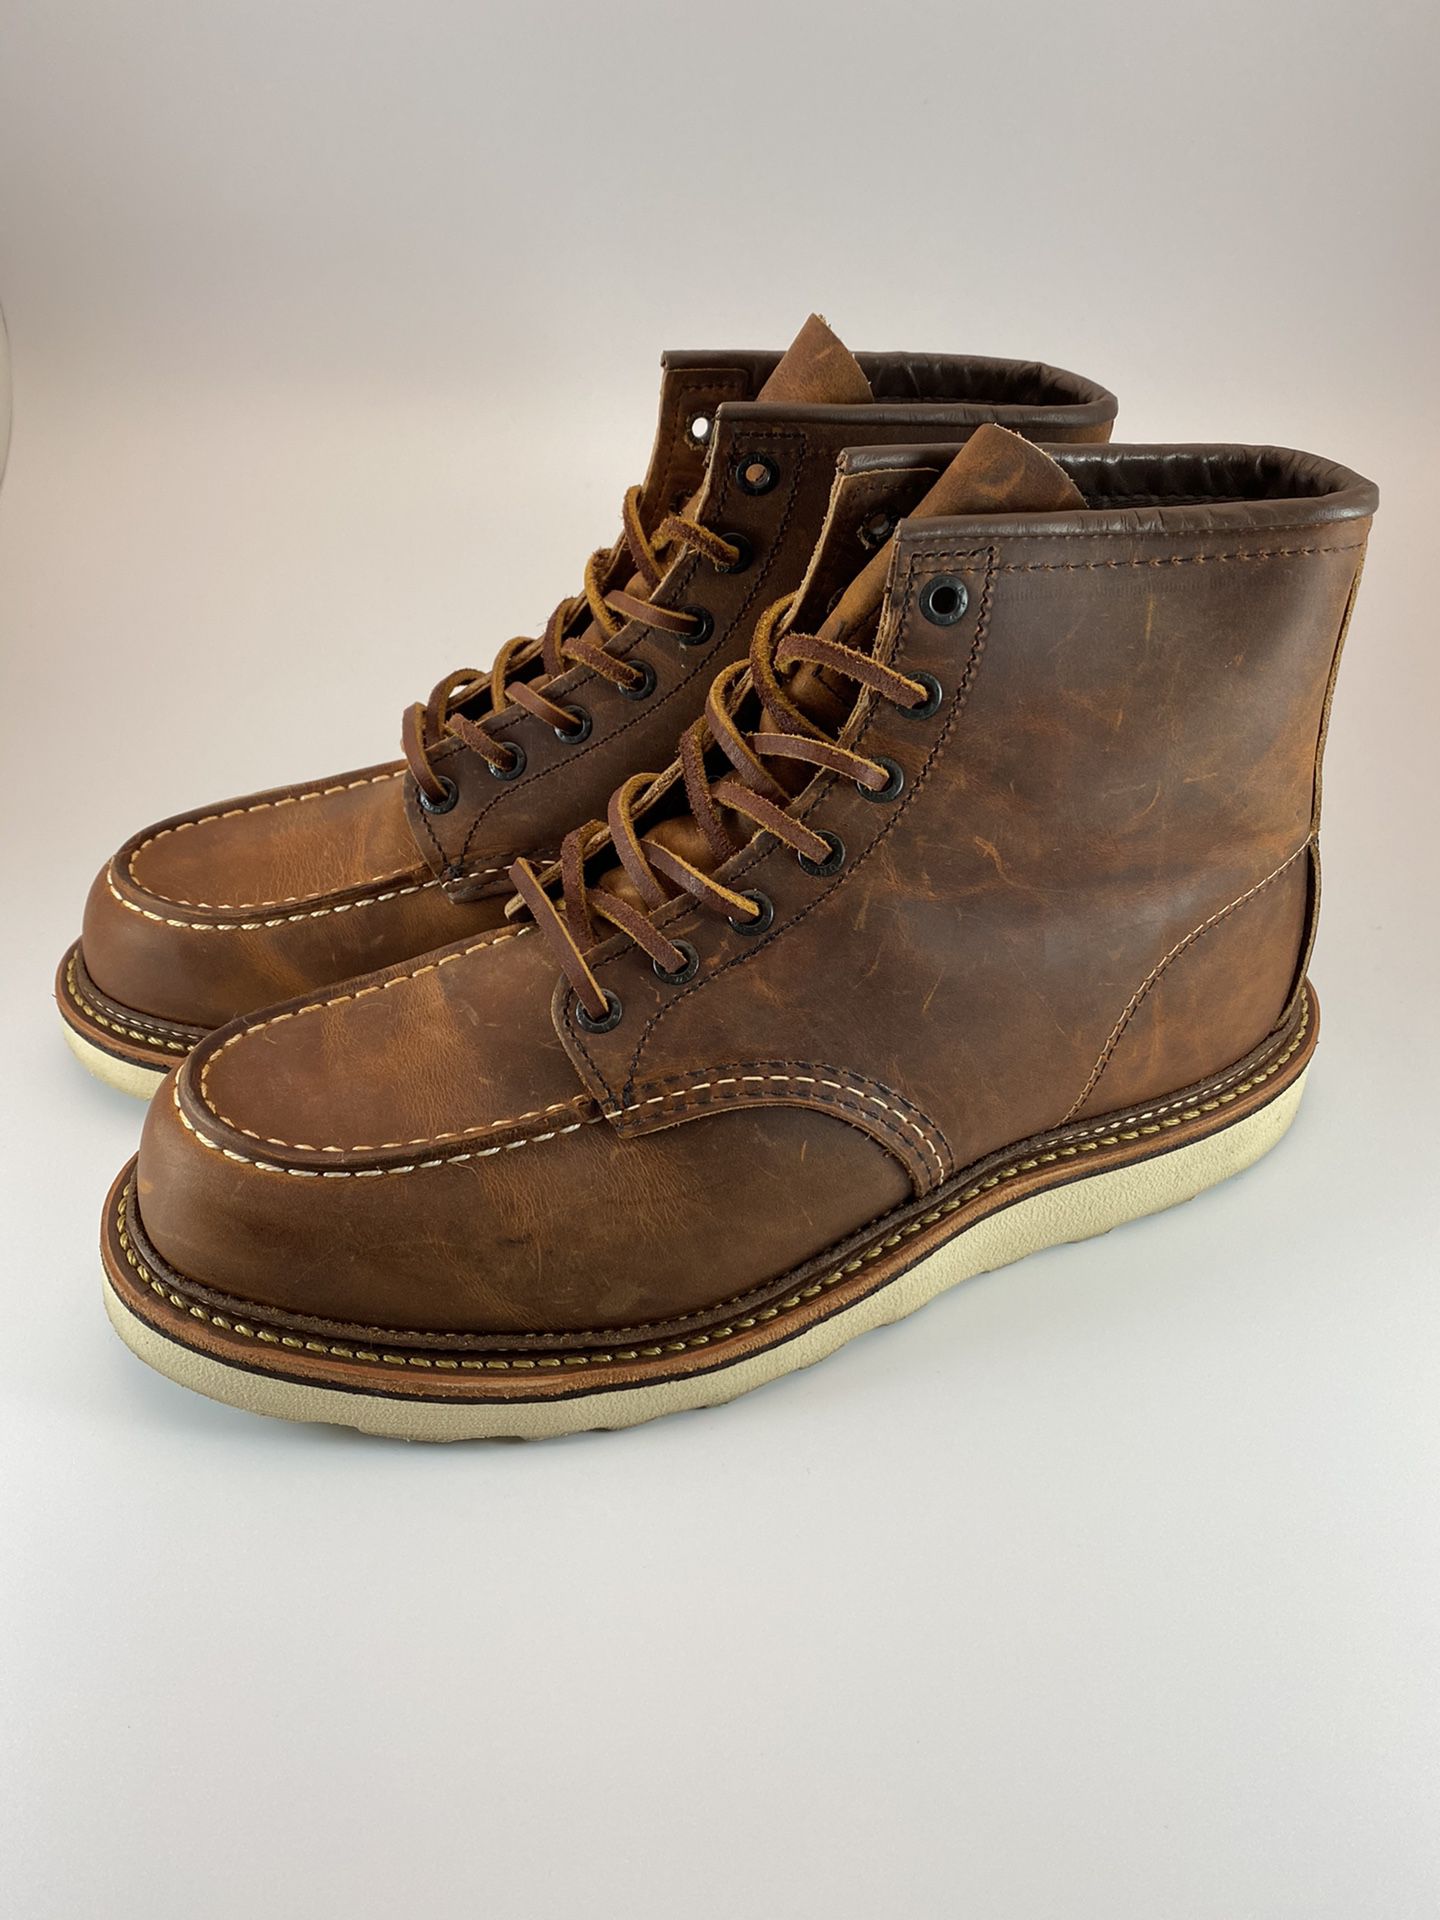 RED WING CLASSIC MOC SIZE 9.5 WORK BOOTS